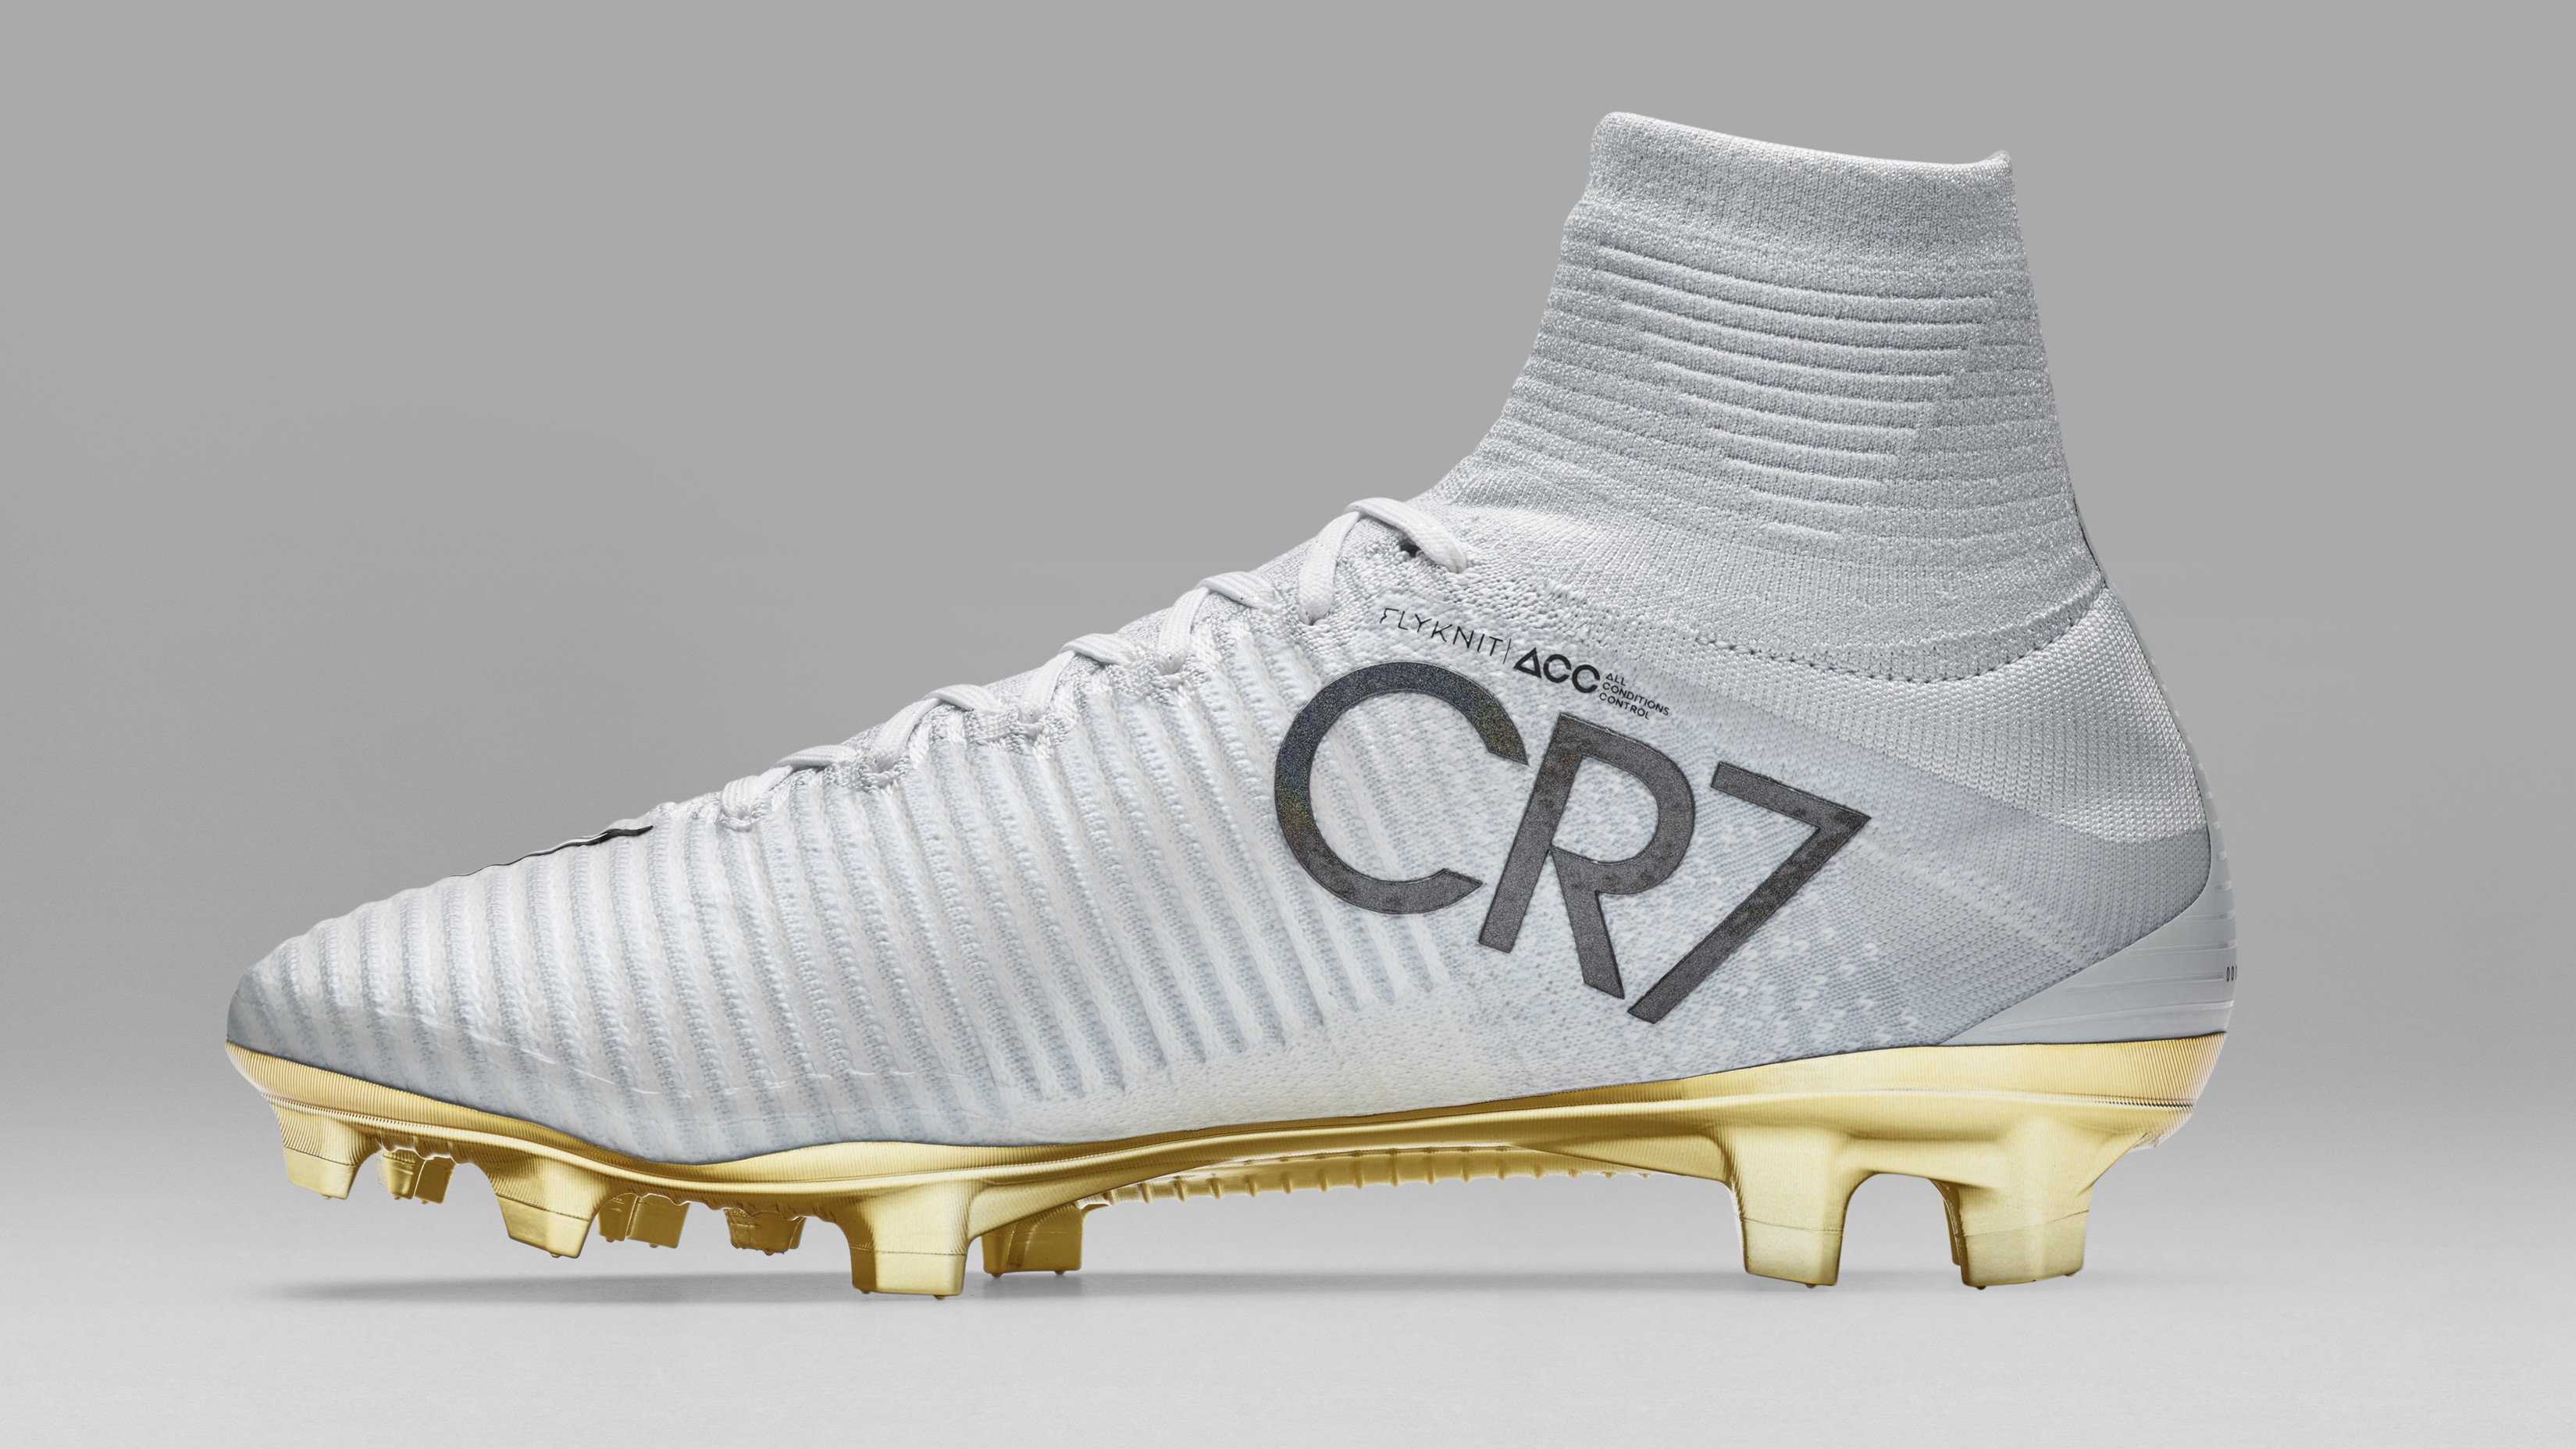 Nike Mercurial Superfly CR7 "Vitorias" Sole Collector